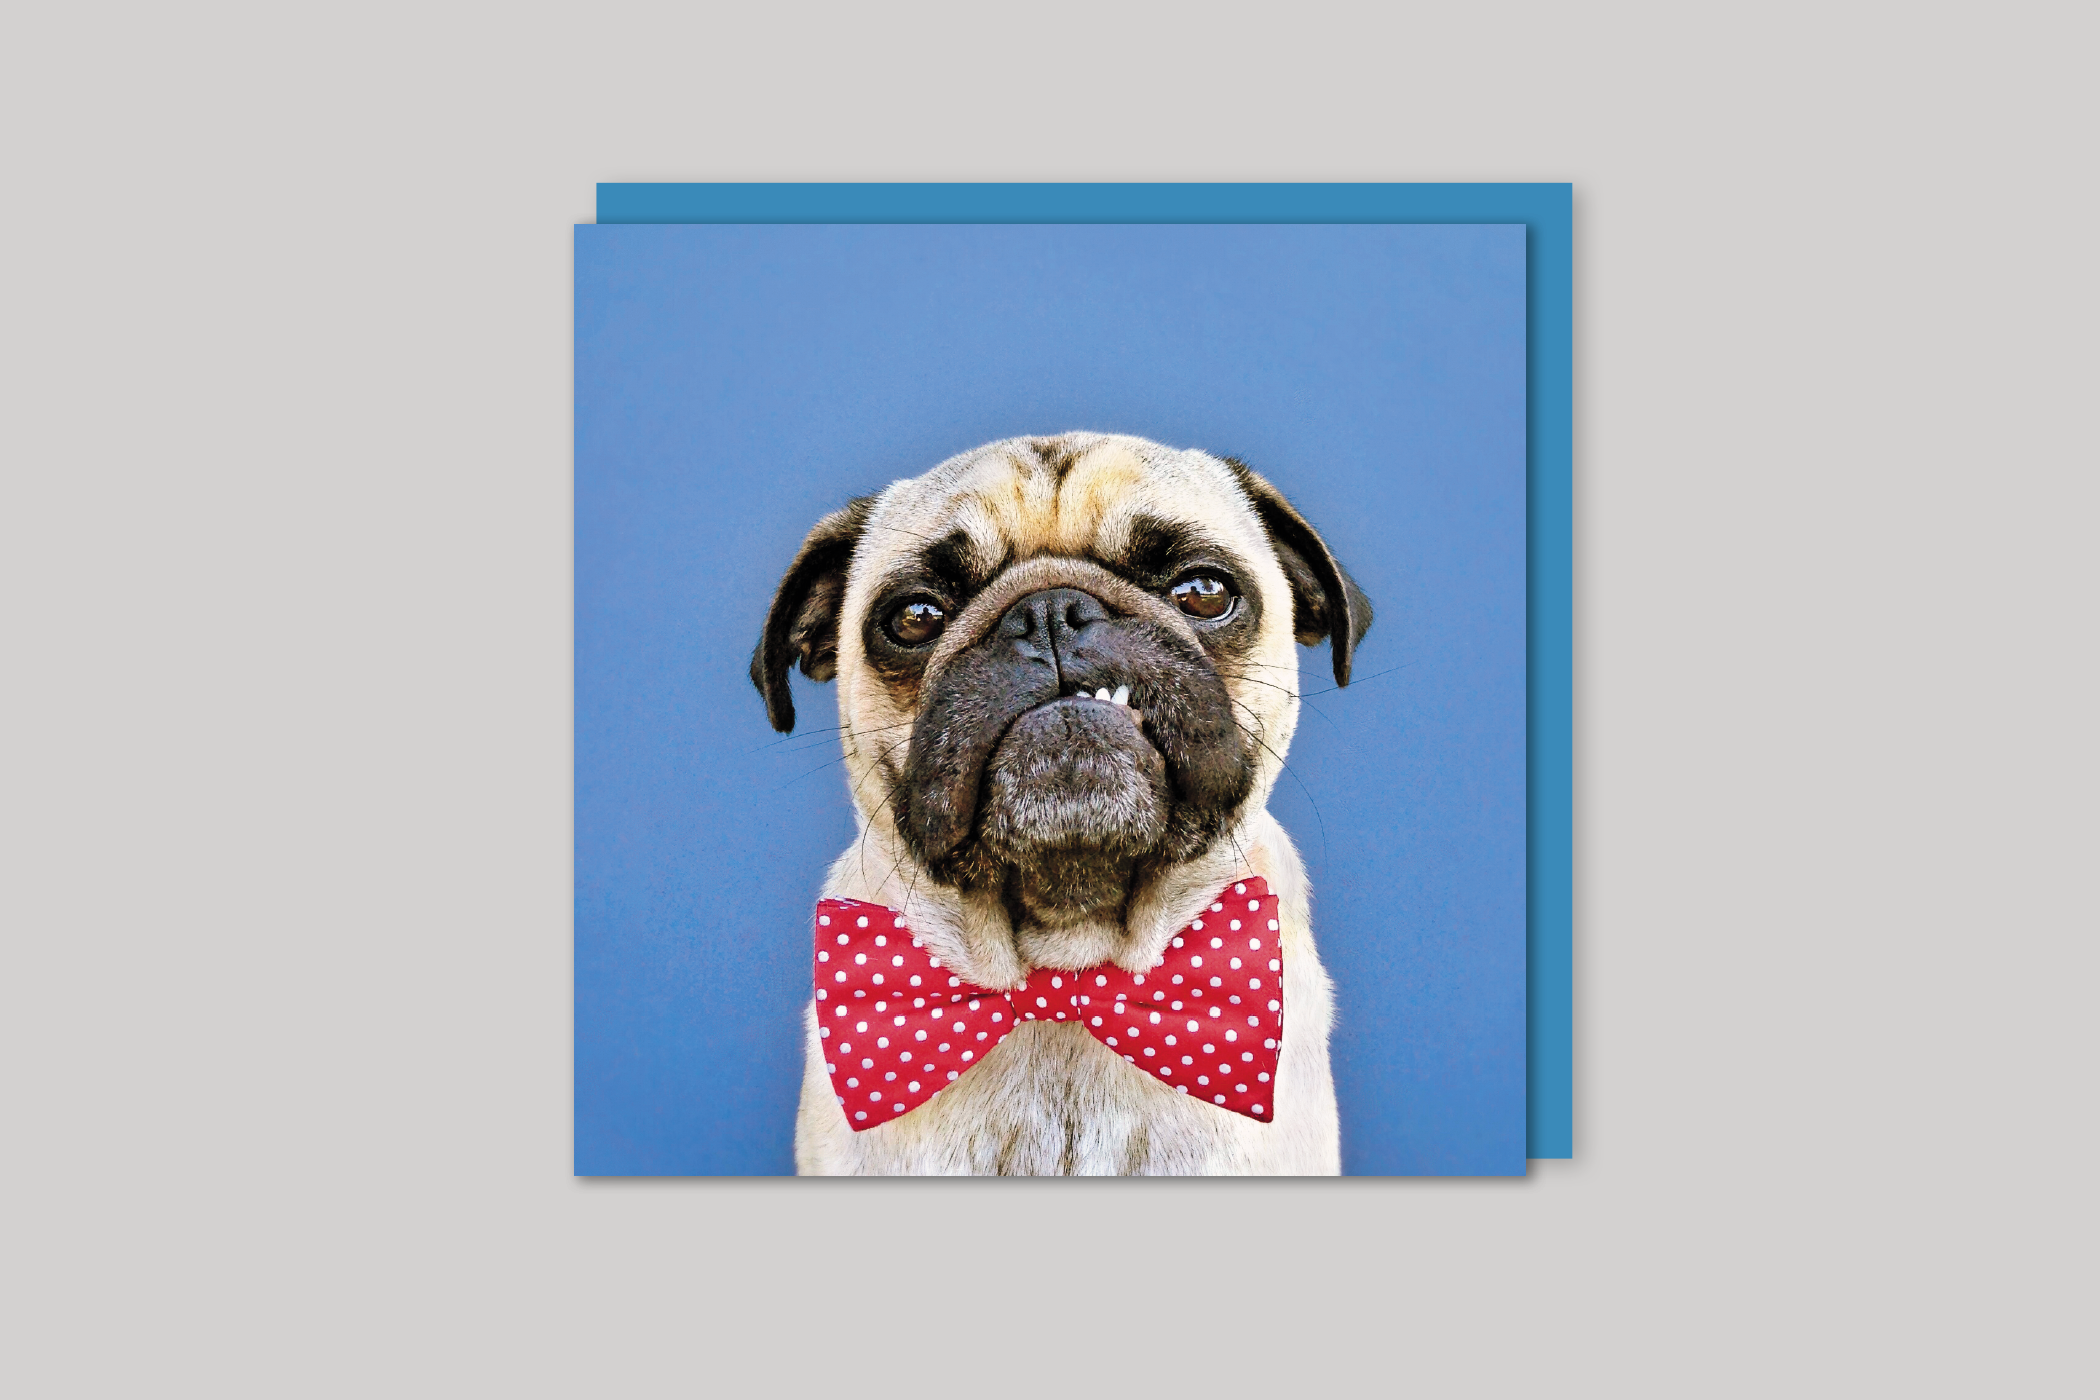 Mr Pug from Wildthings range of greeting cards by Icon, back page.